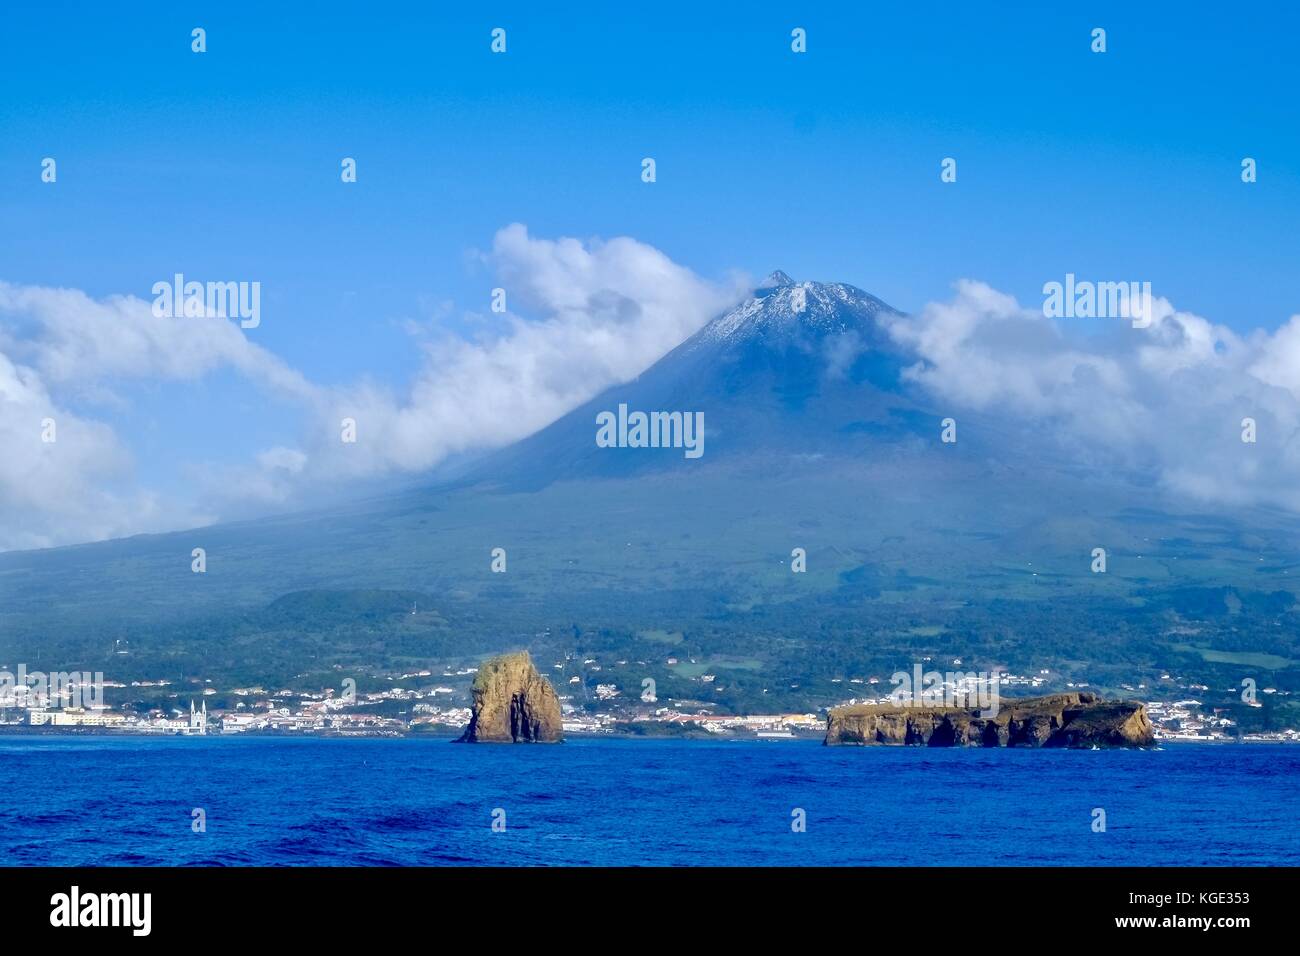 Approaching Pico Island from the ocean Stock Photo